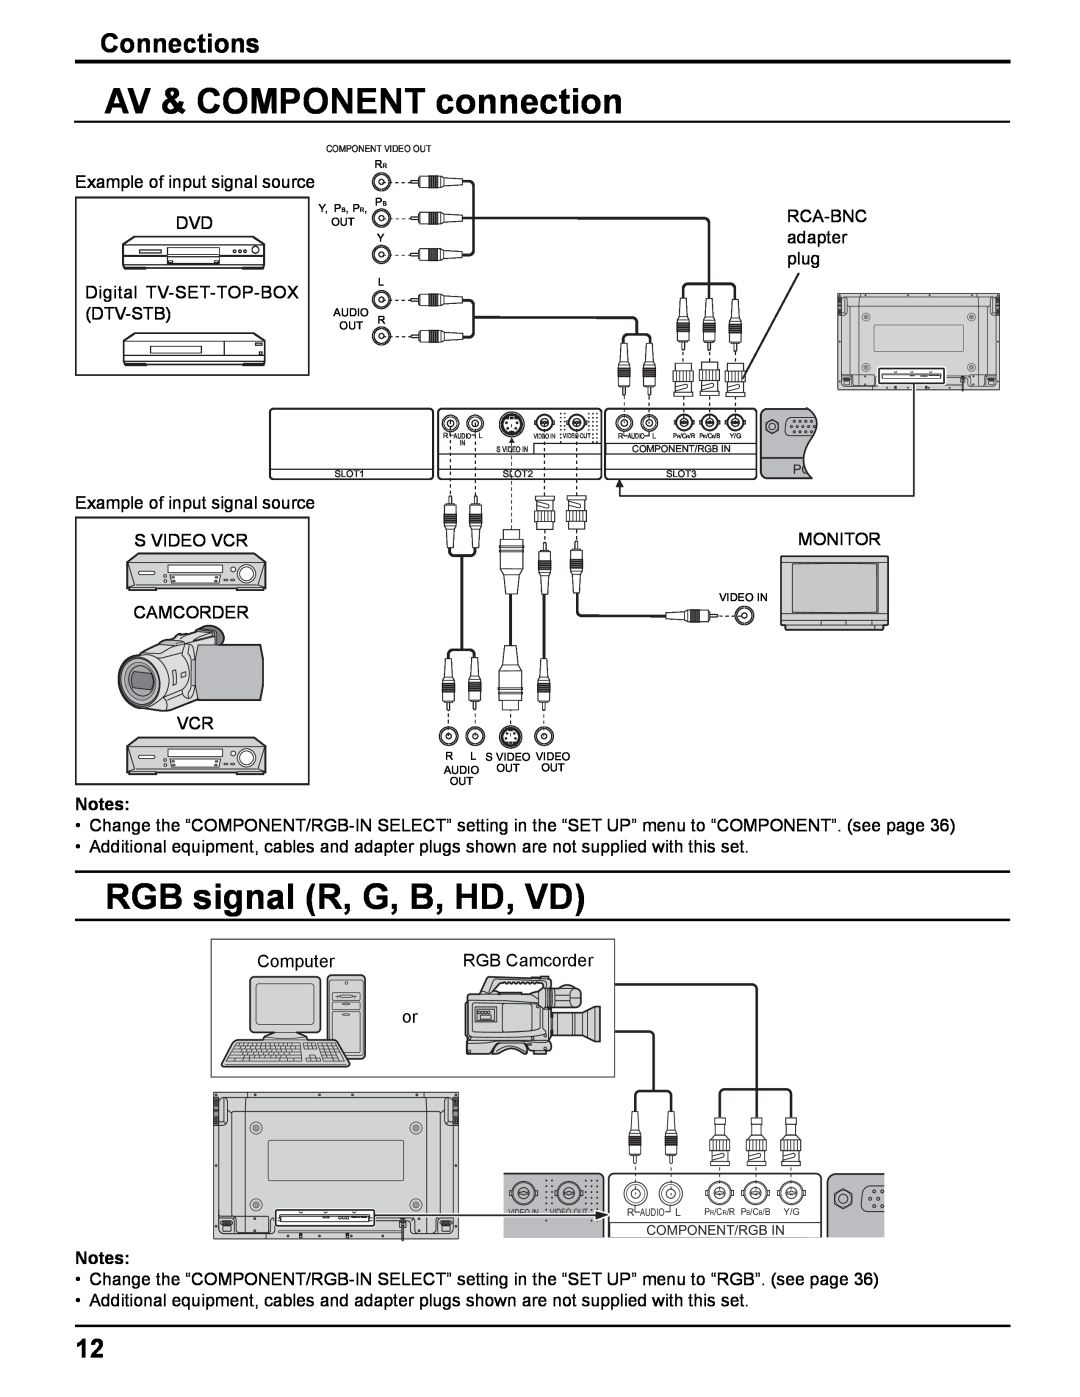 Panasonic TH-37PHD8UK, TH-37PWD8UK AV & COMPONENT connection, RGB signal R, G, B, HD, VD, Connections, Component/Rgb In 